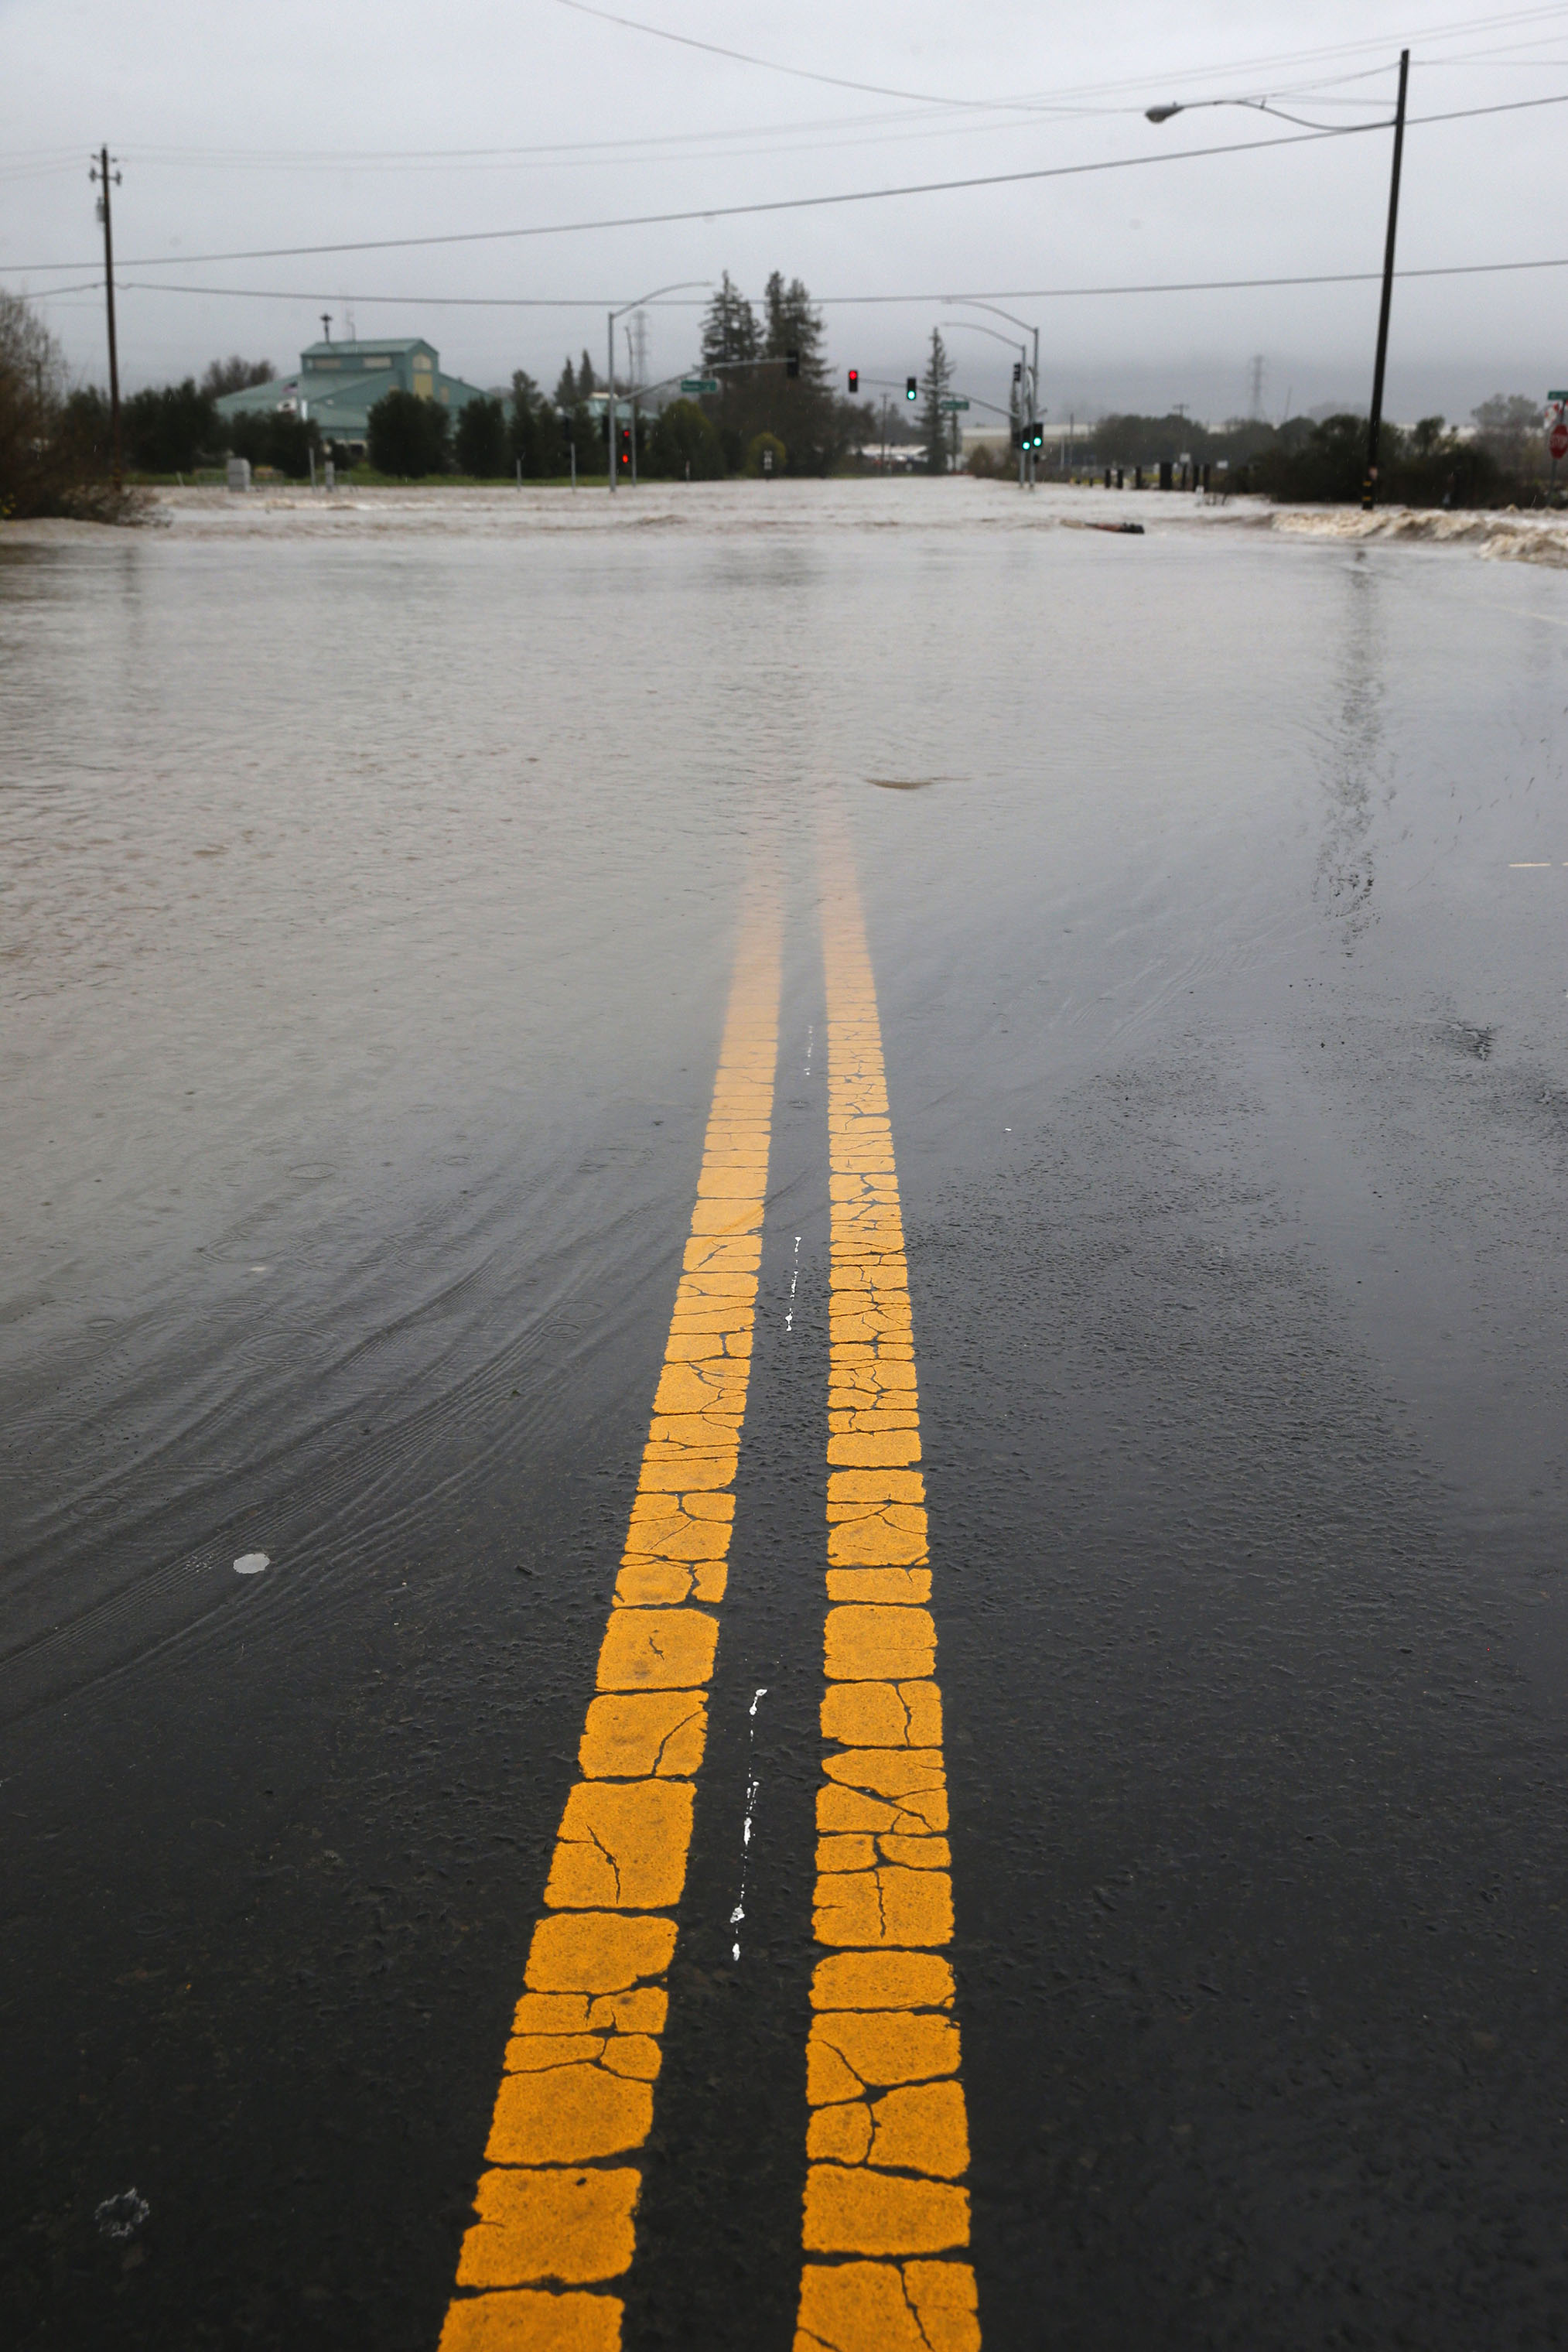 The intersection of Highways 121 and 12 are closed to traffic after the Sonoma Creek surged over its banks and flooded the roadway during the heavy rainstorm in Sonoma, California on Feb. 26, 2019. (Paul Chinn—San Francisco Chronicle/Polaris)